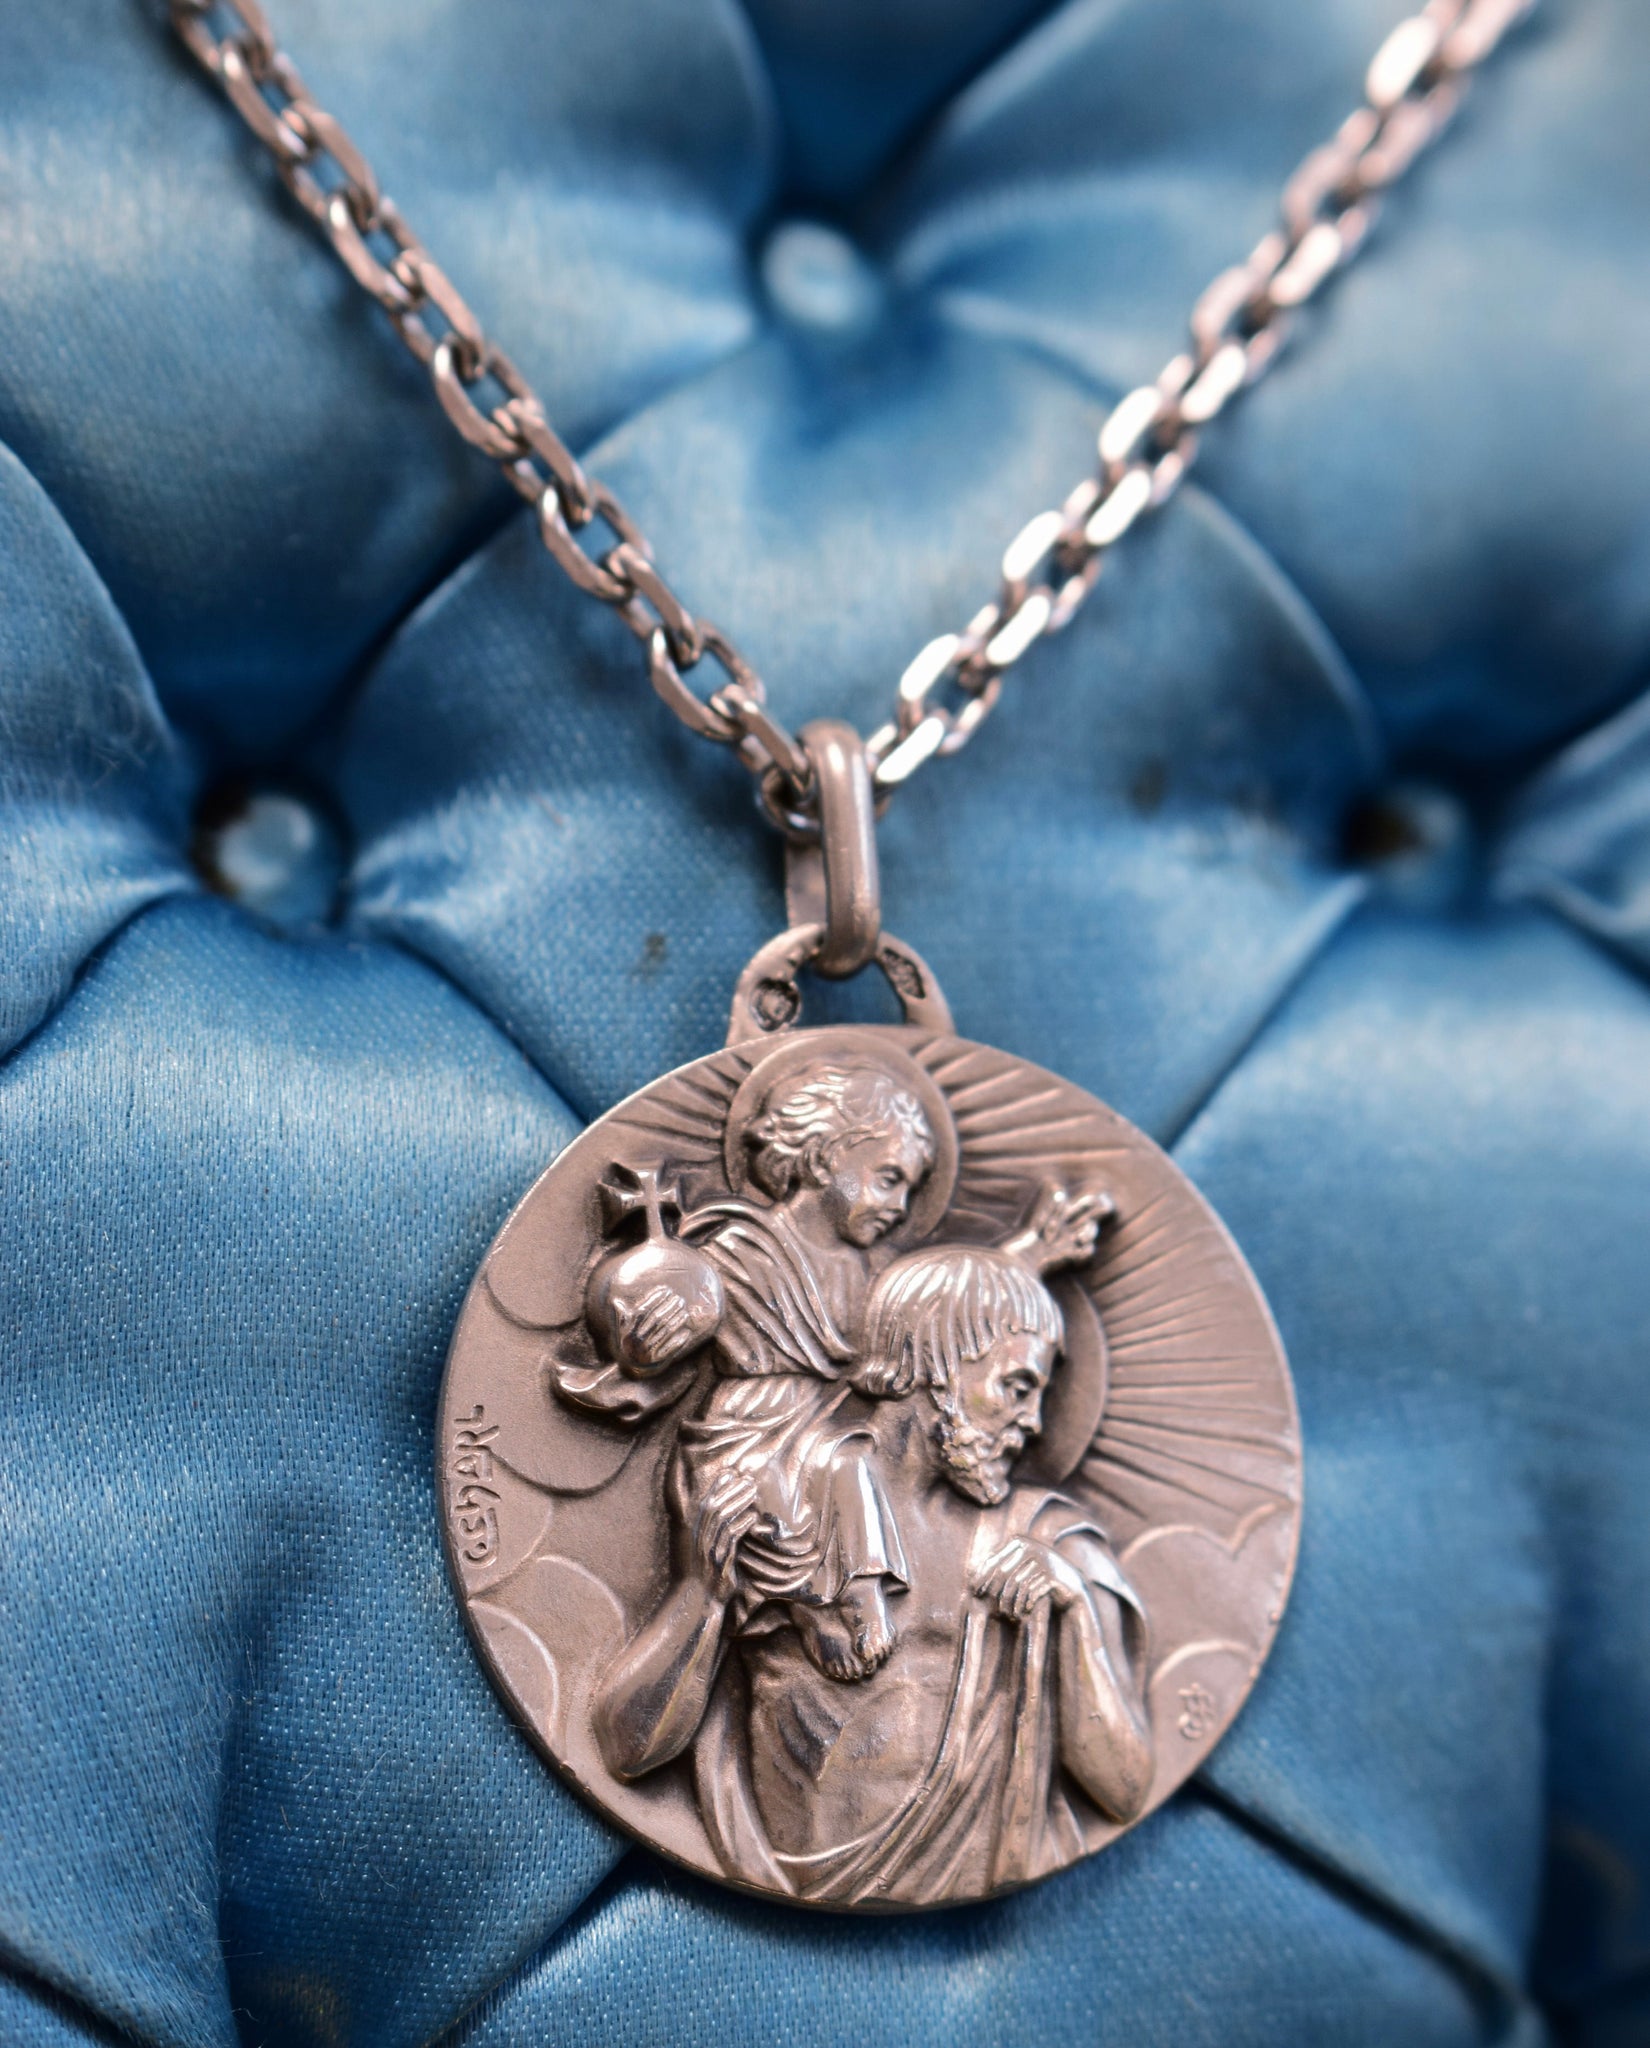 St Christopher Necklace by C Charl